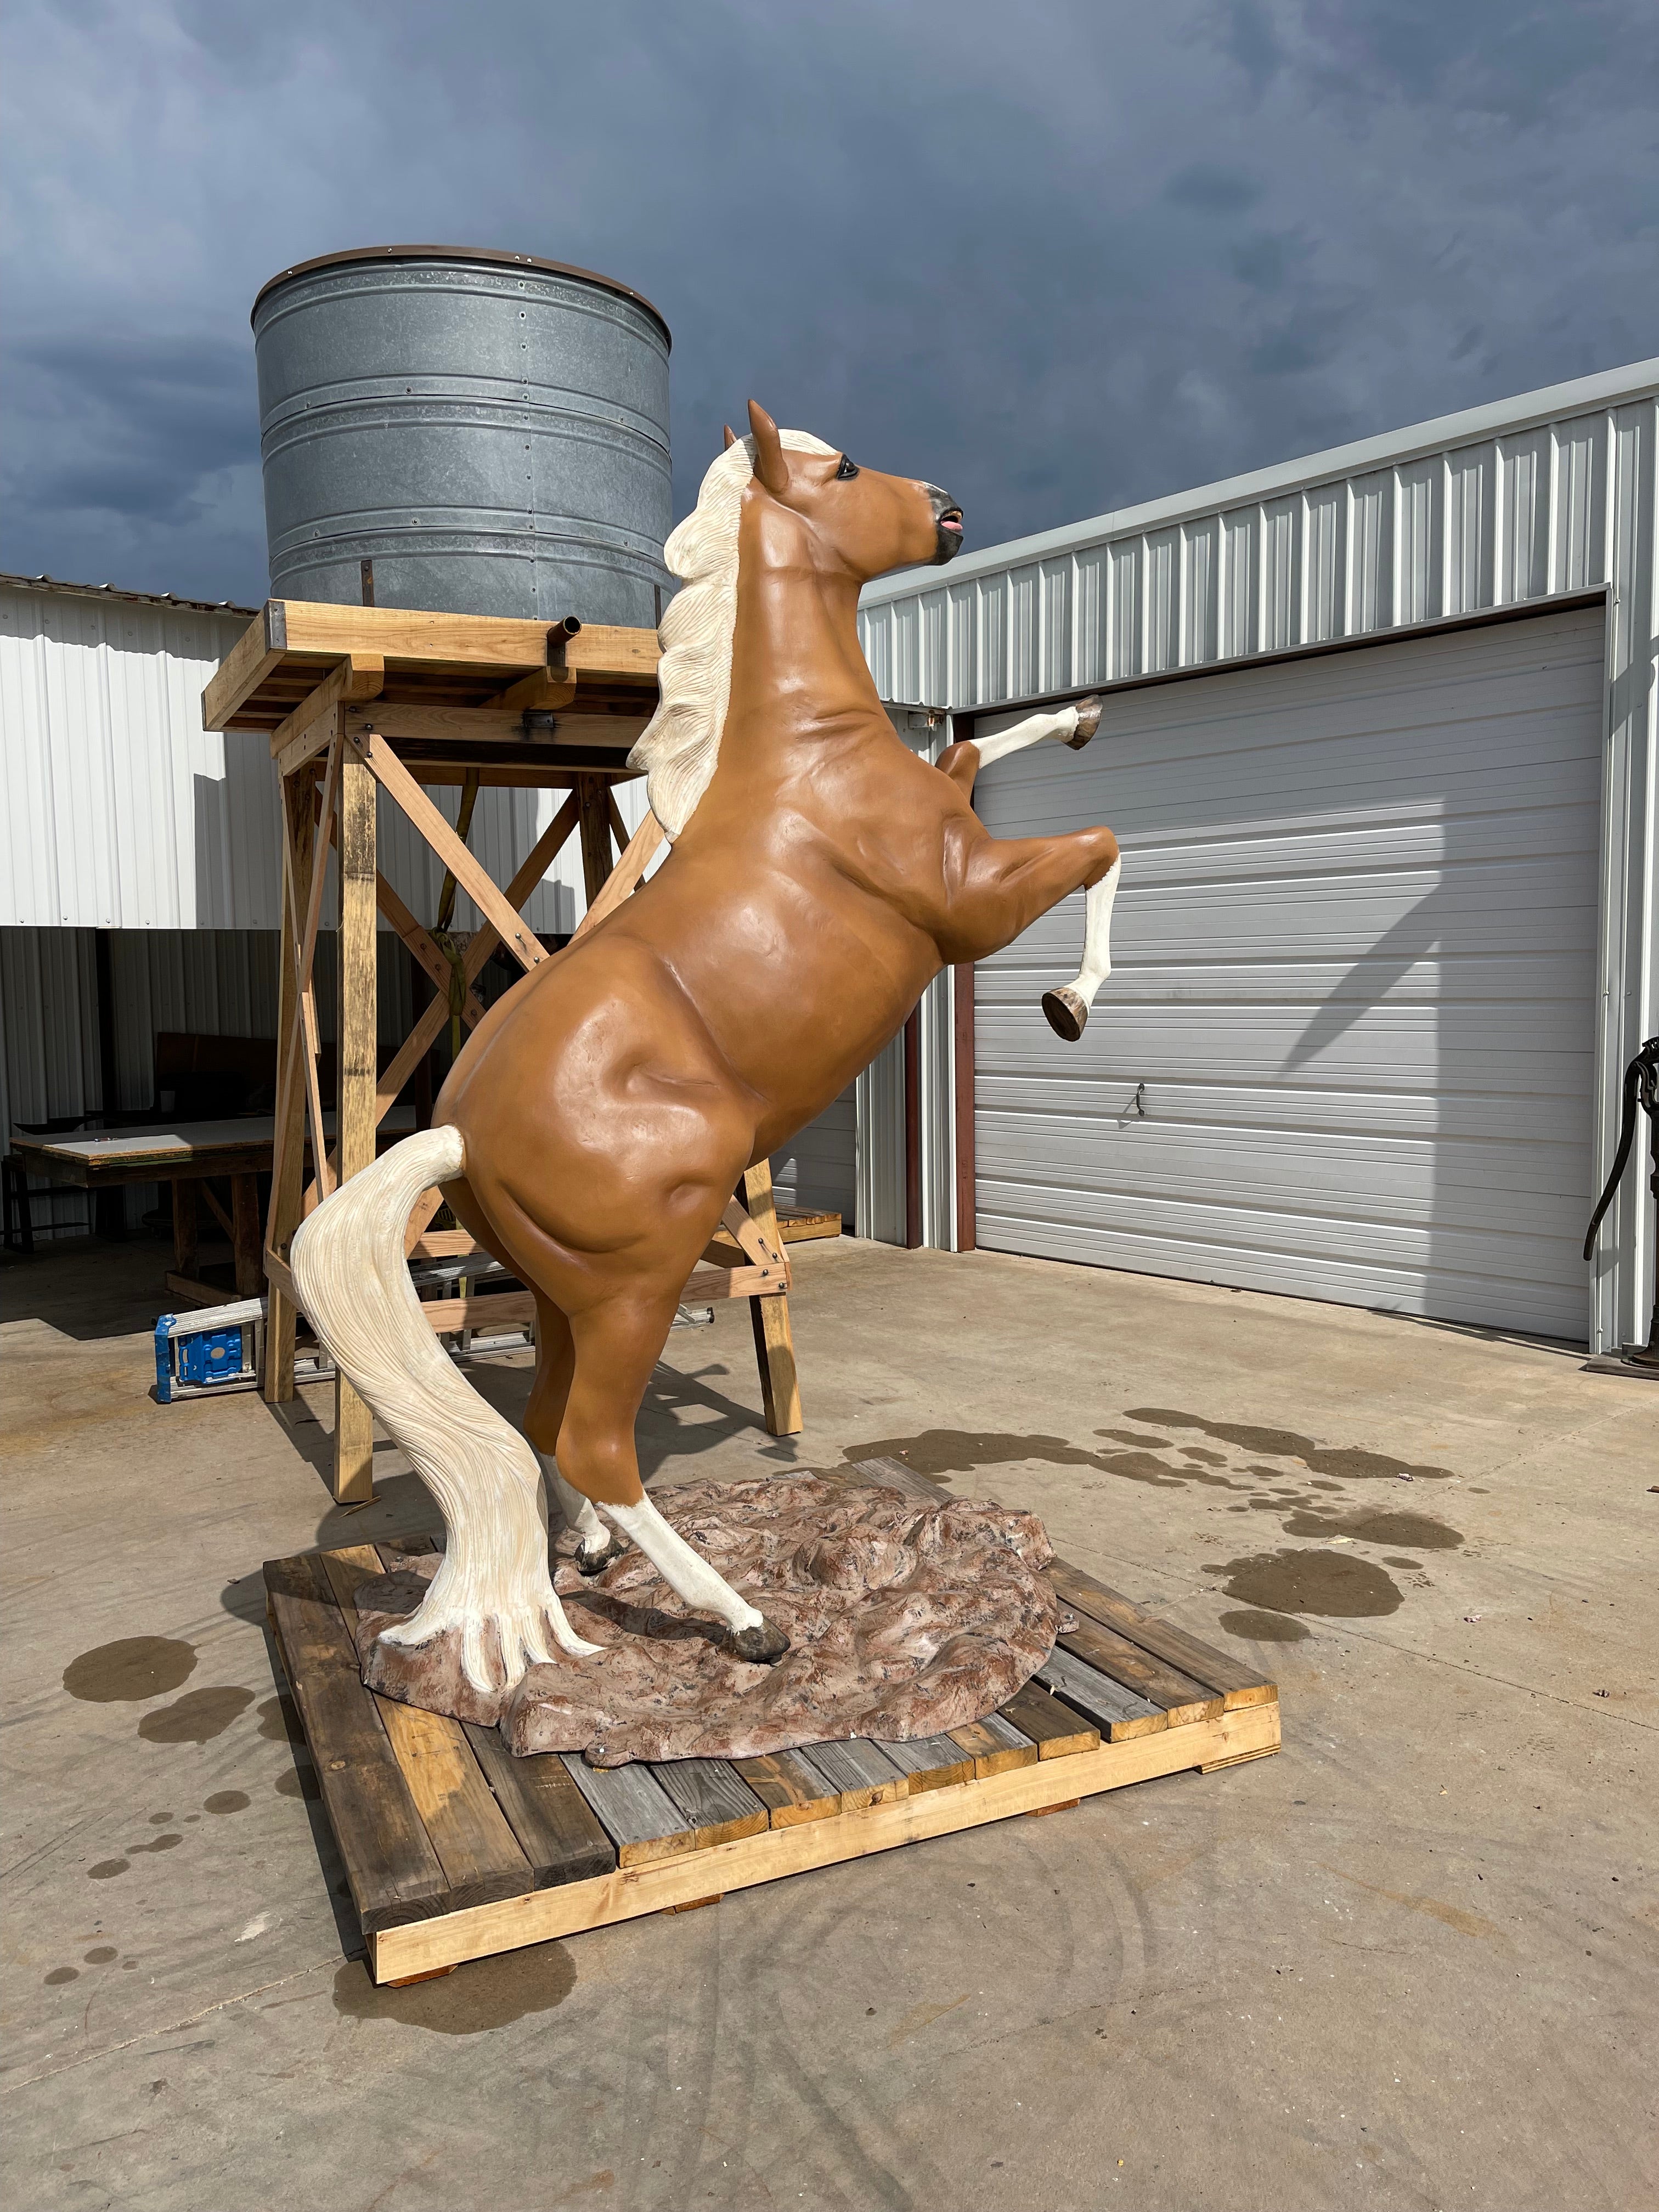 SOLD*Raring Horse Life Size Statue